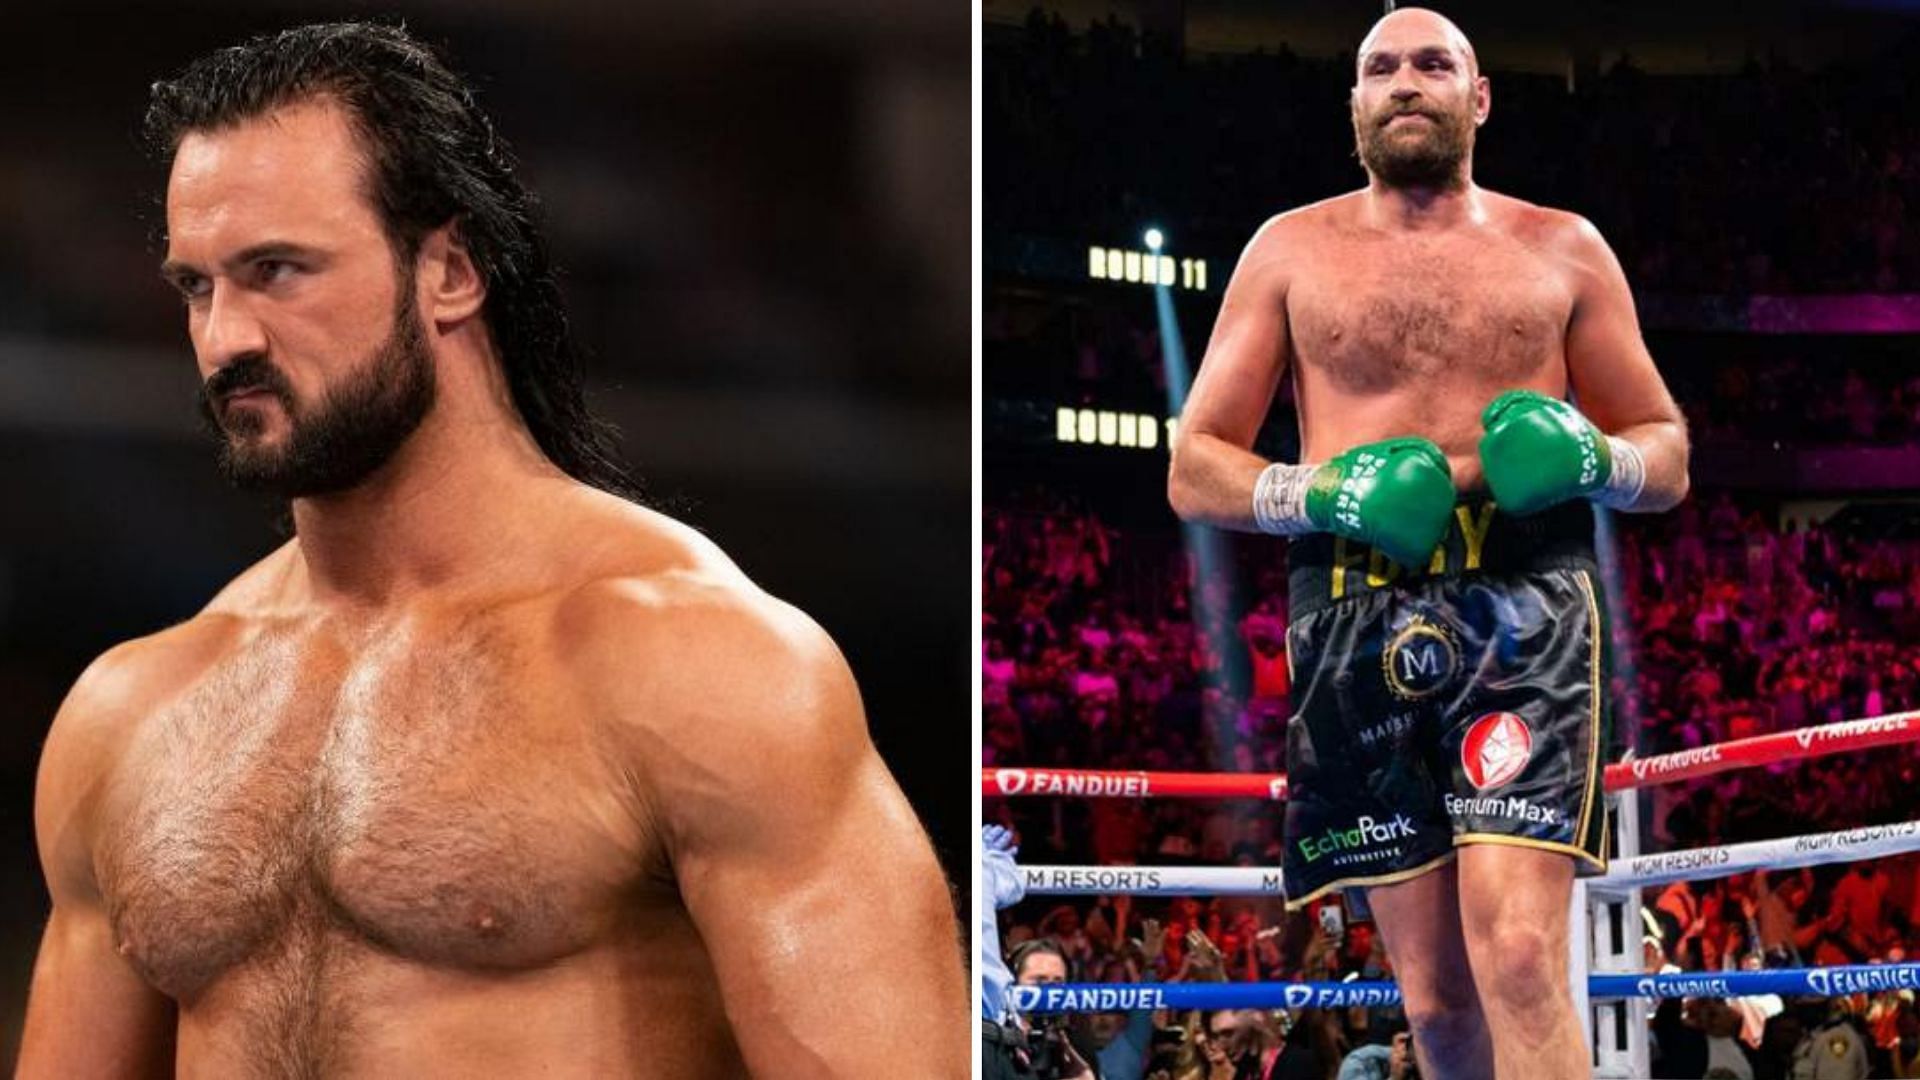 Drew Mcintyre Comments On Tyson Fury Potentially Refereeing His Match